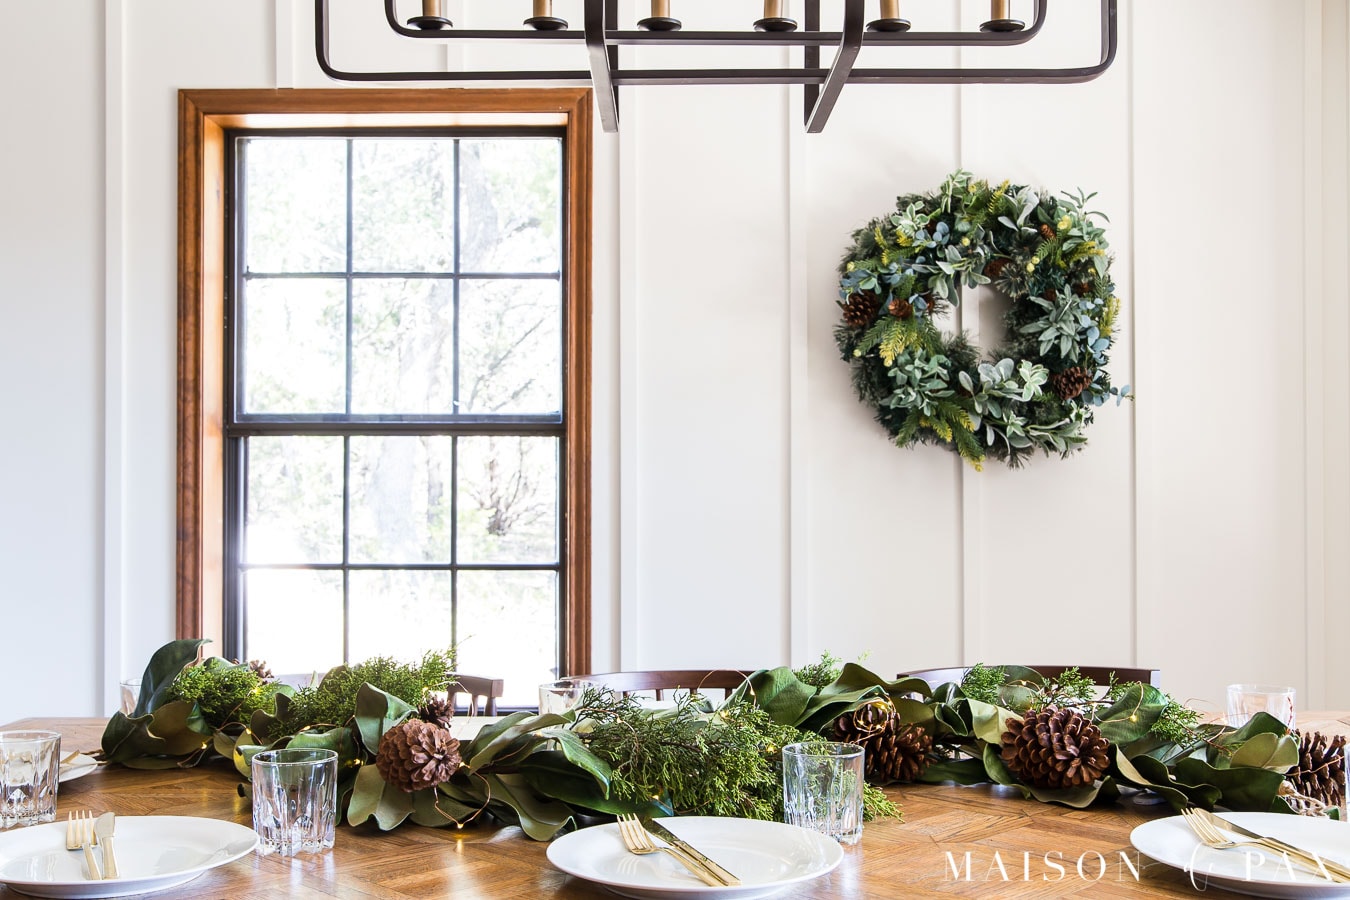 white dishes, gold flatware, fresh greenery, holiday table | maison de Pax